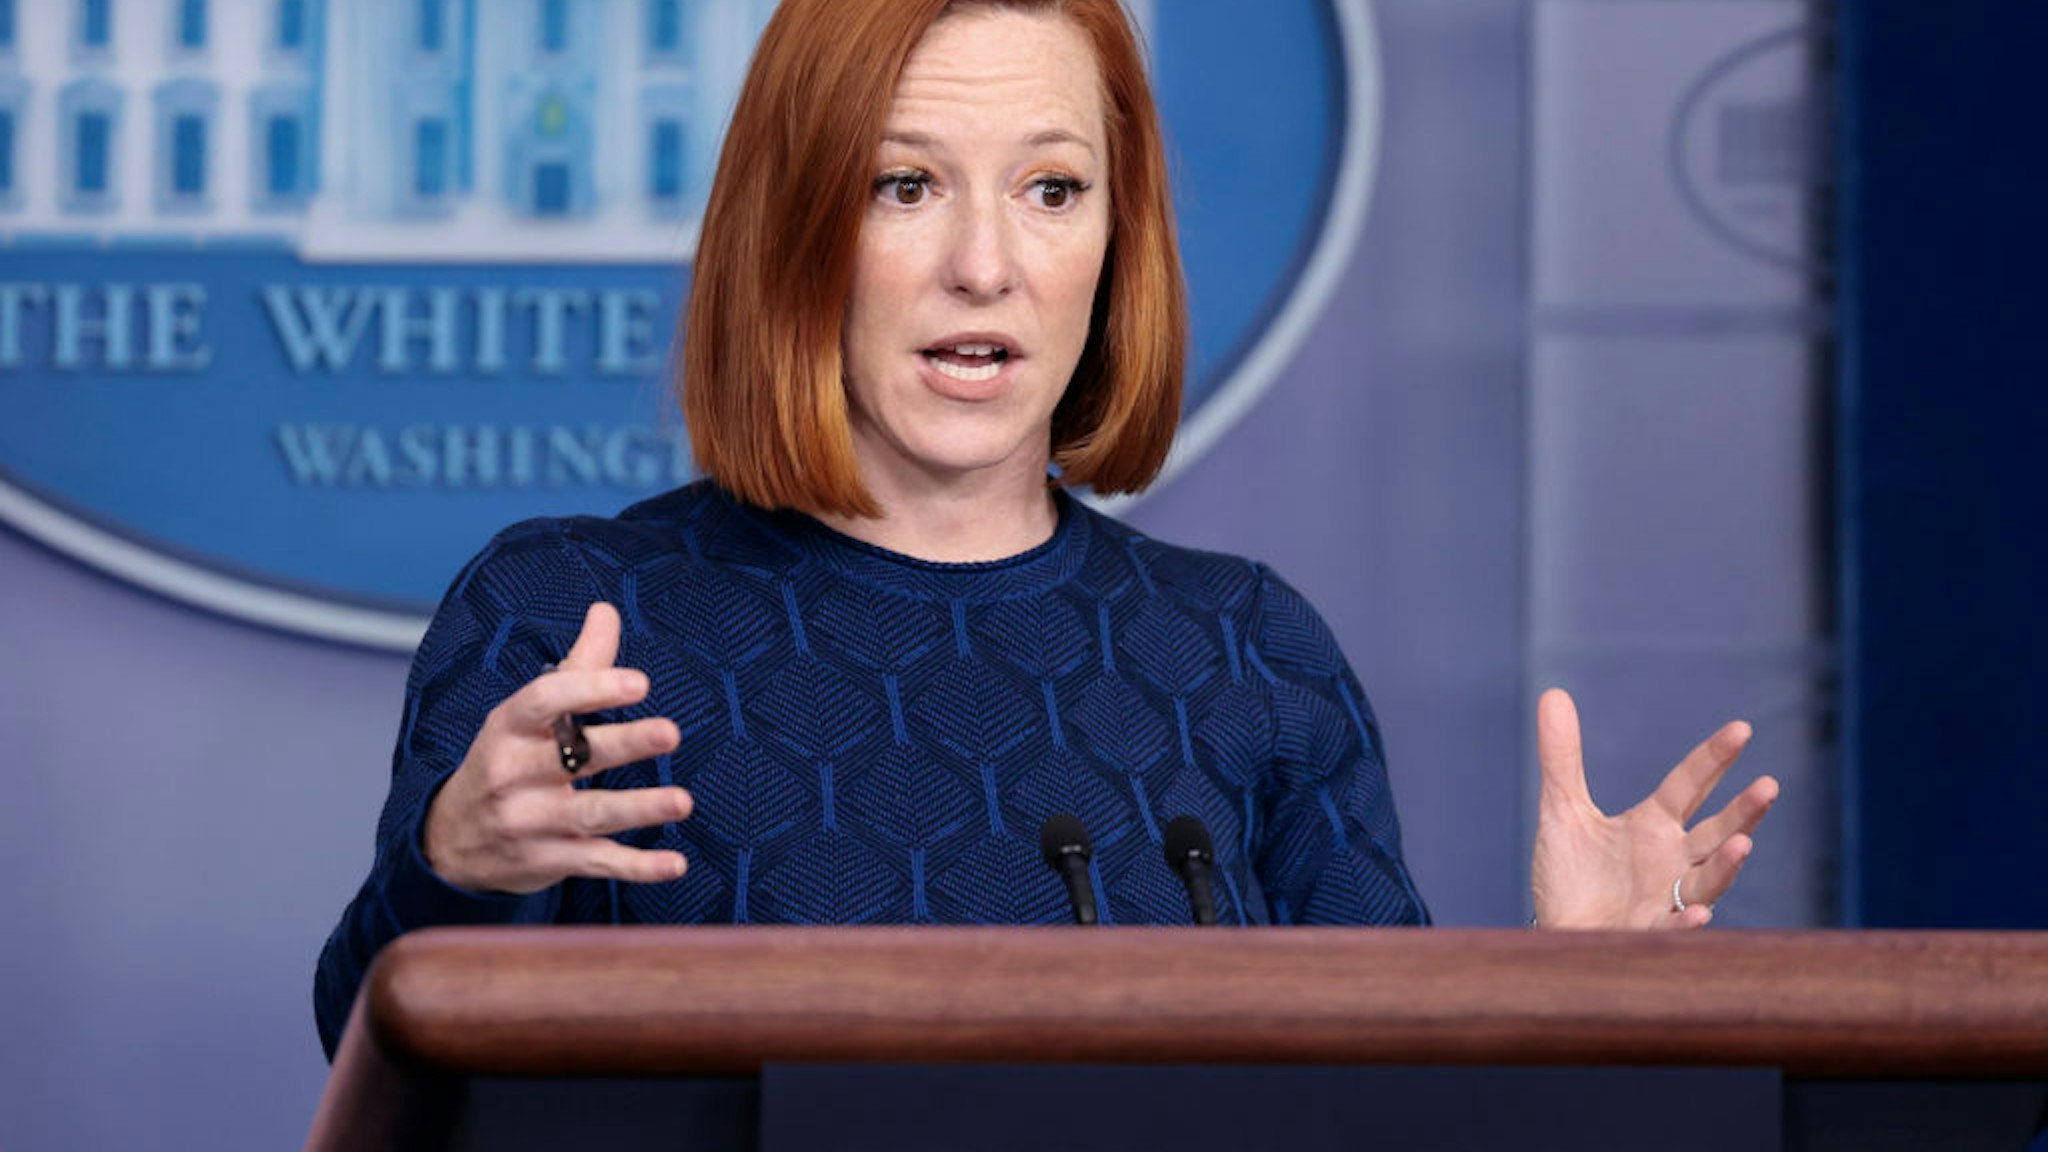 WASHINGTON, DC - JANUARY 10: White House press secretary Jen Psaki answers questions during the daily White House press briefing on January 10, 2022 in Washington, DC. During the press briefing, Psaki spoke on a range of topics including voting rights legislation on Capitol Hill and the Biden administration's continued efforts to expand COVID testing in the country. (Photo by Anna Moneymaker/Getty Images)